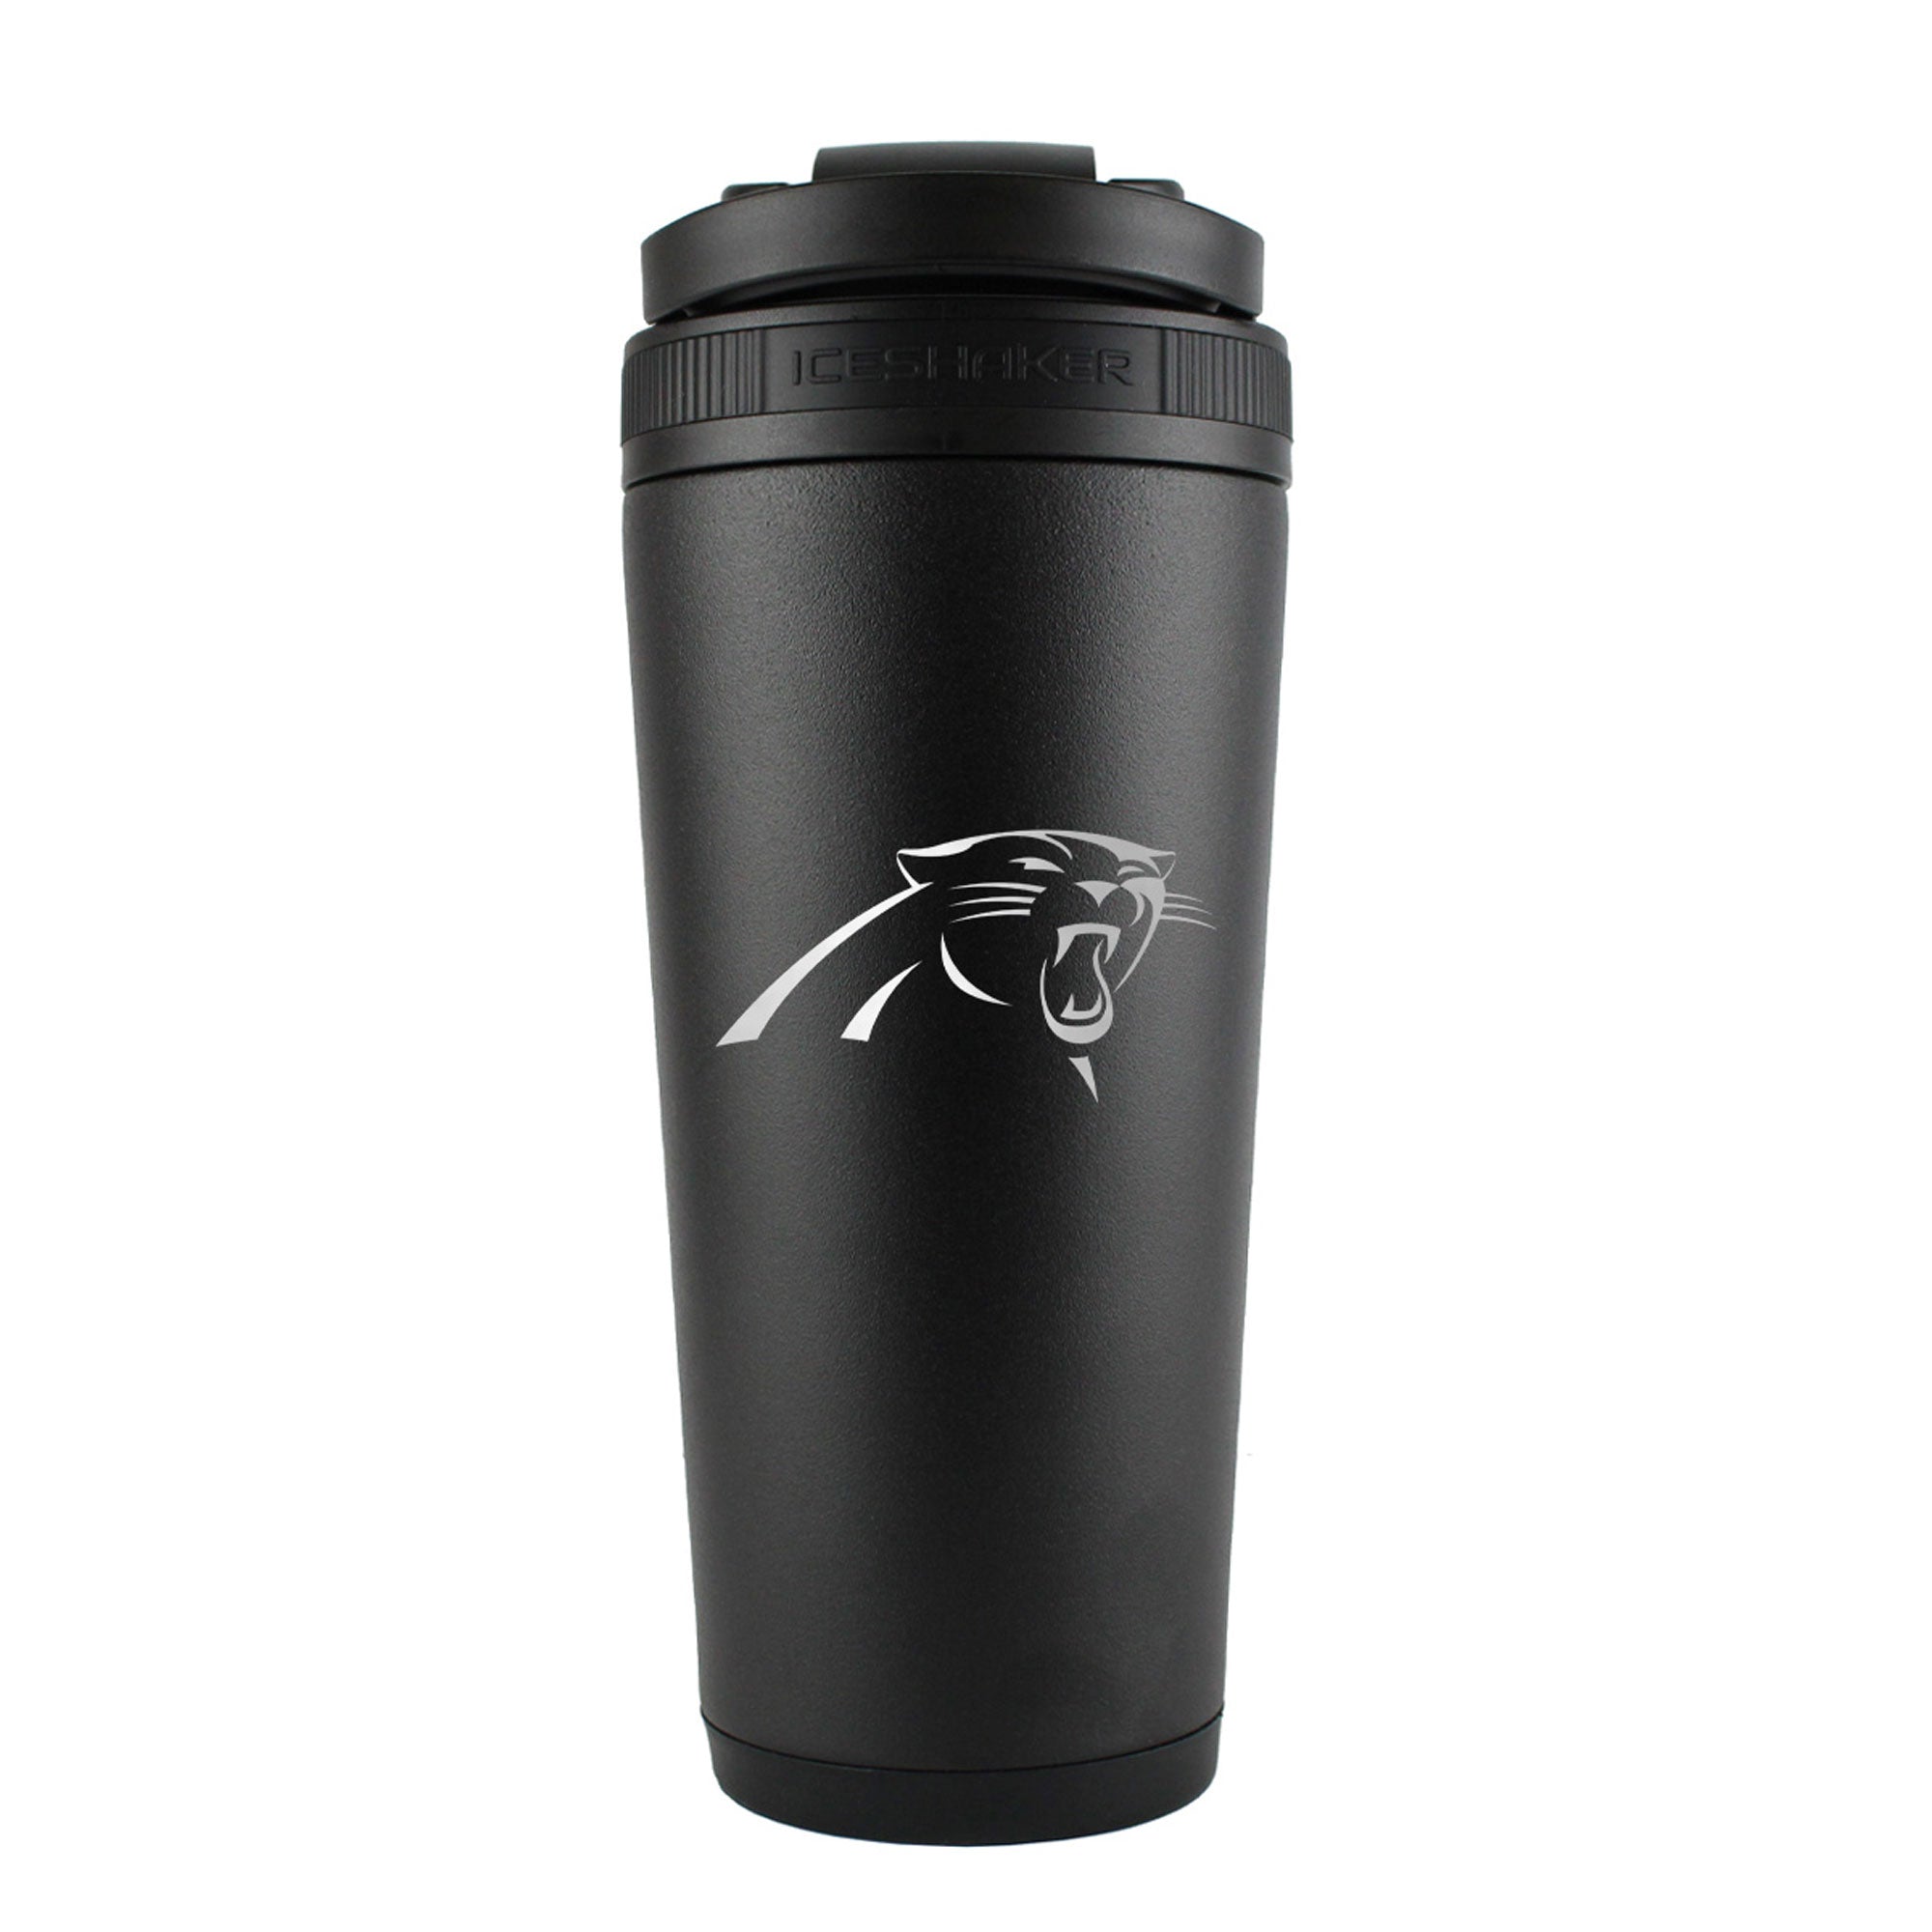 Officially Licensed Carolina Panthers 26oz Ice Shaker - Black